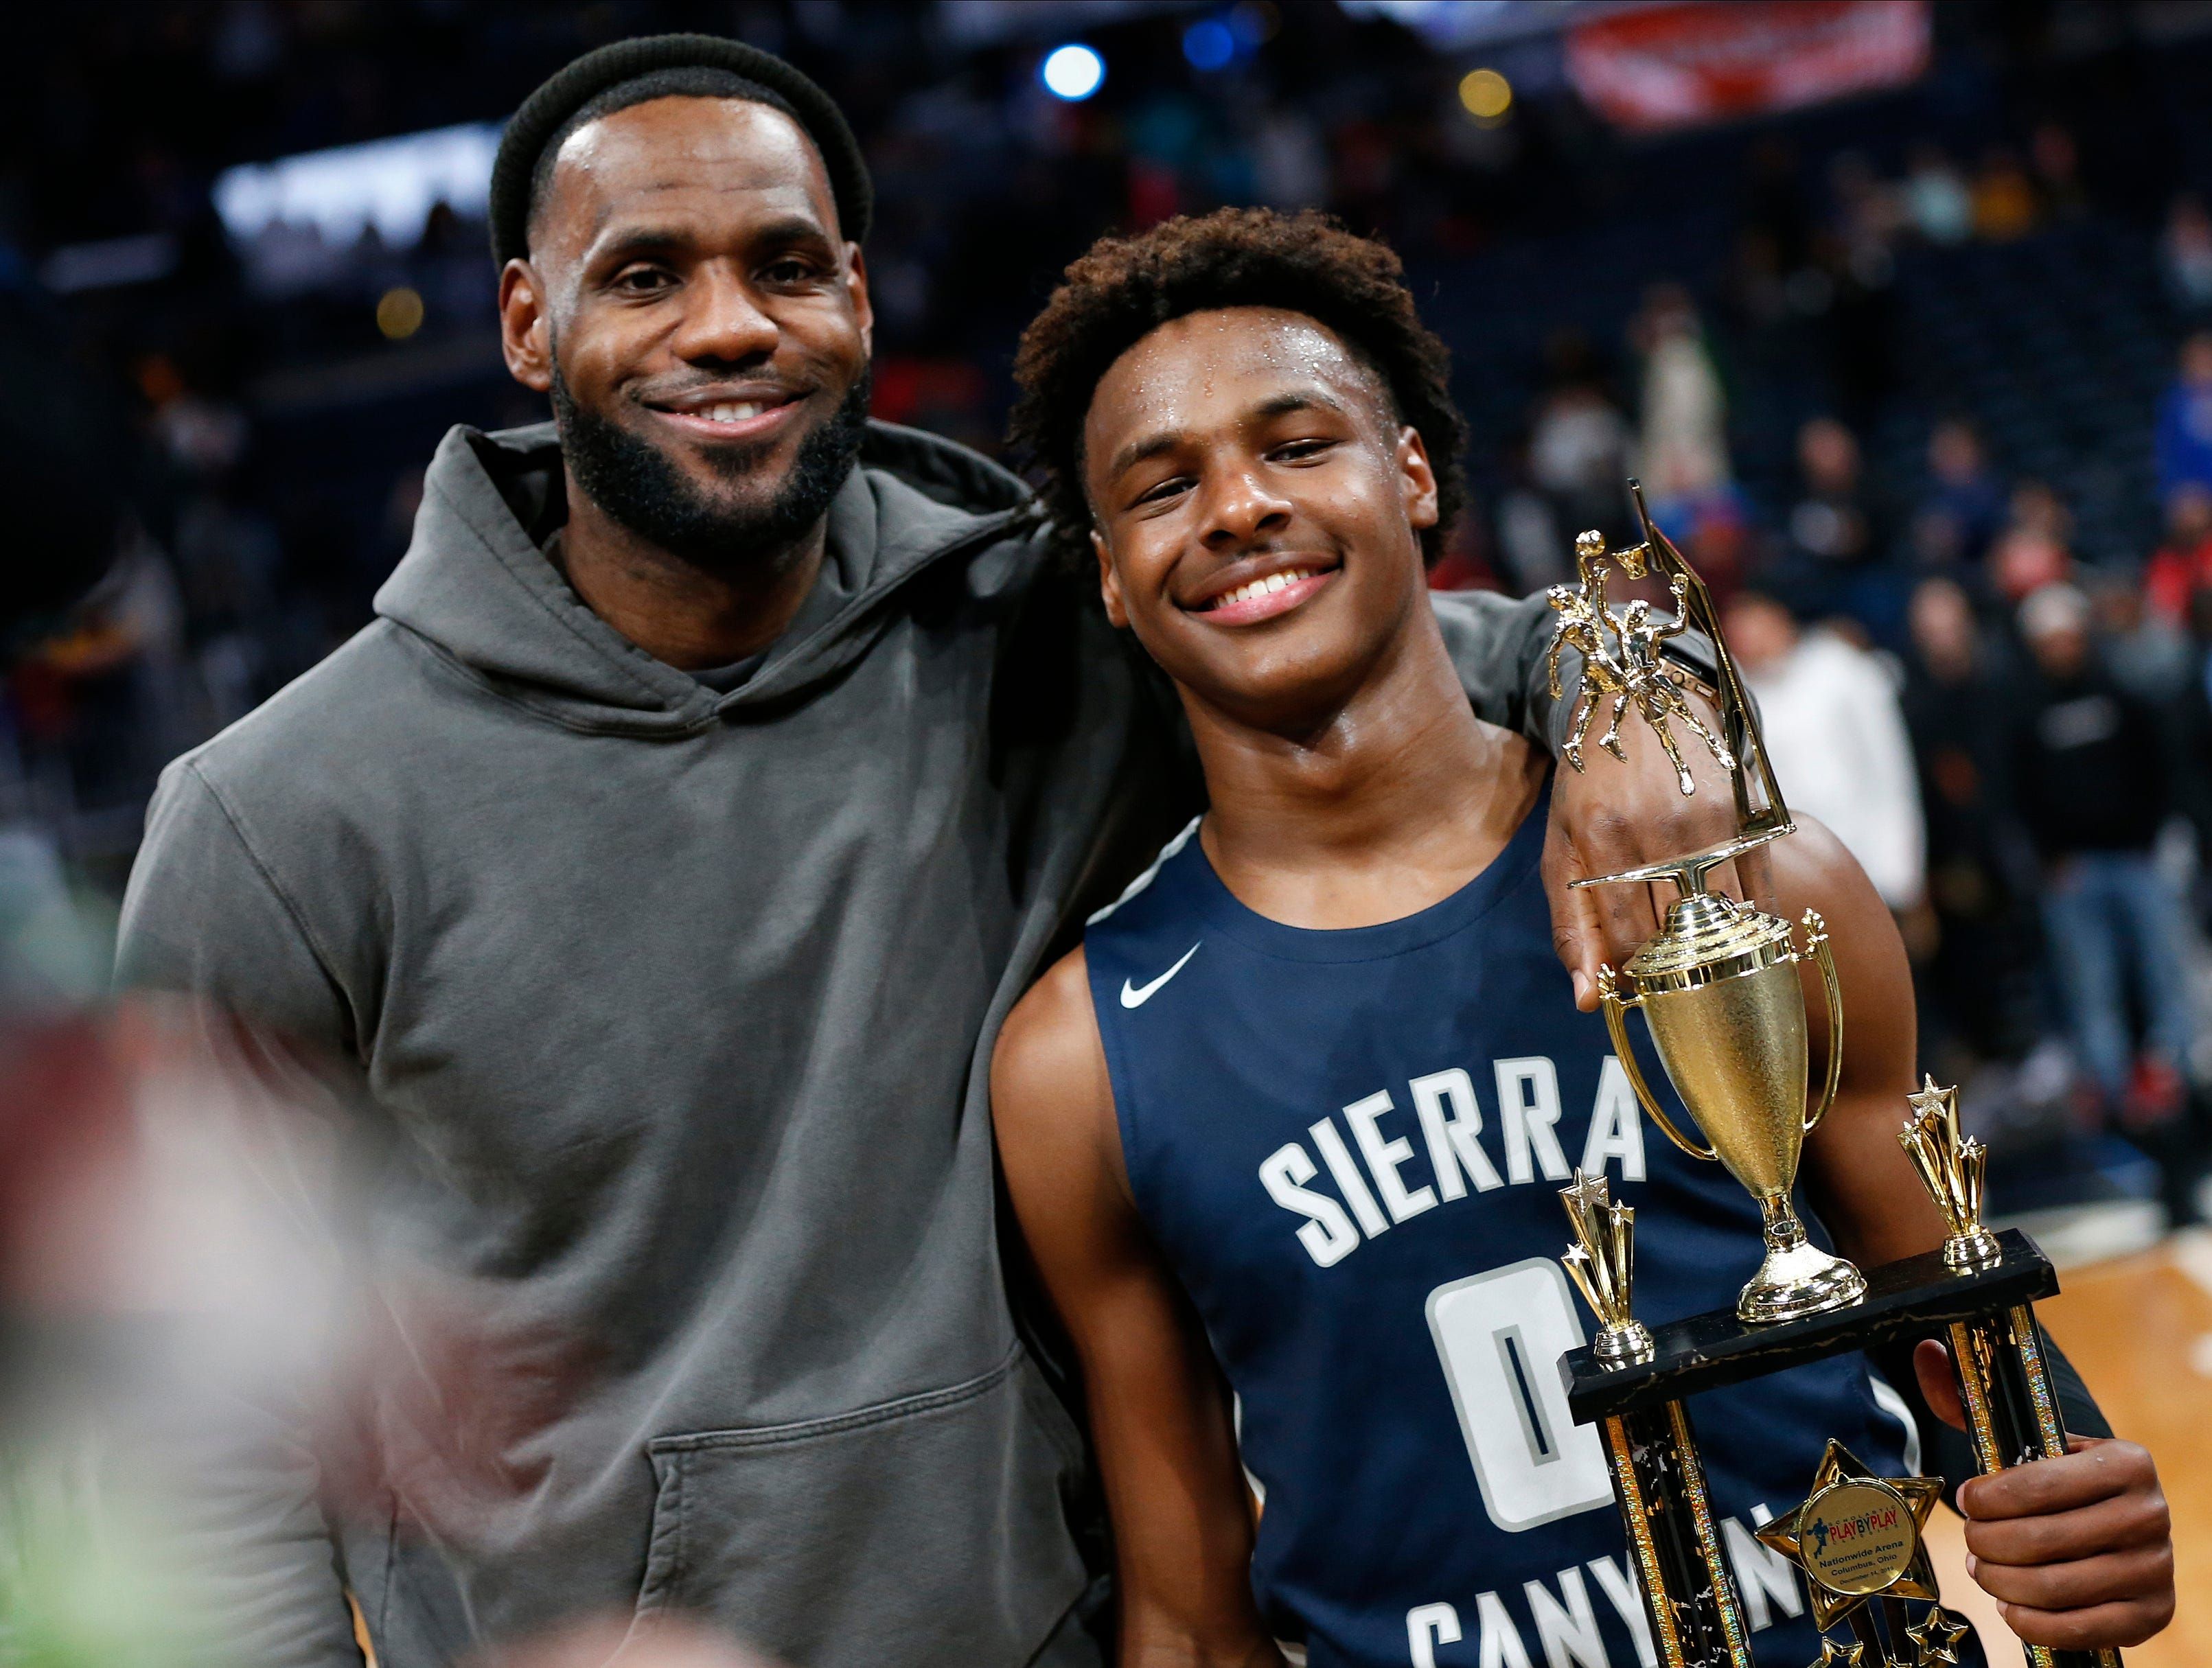 Bronny James, son of LeBron James, found dead in alleyway.